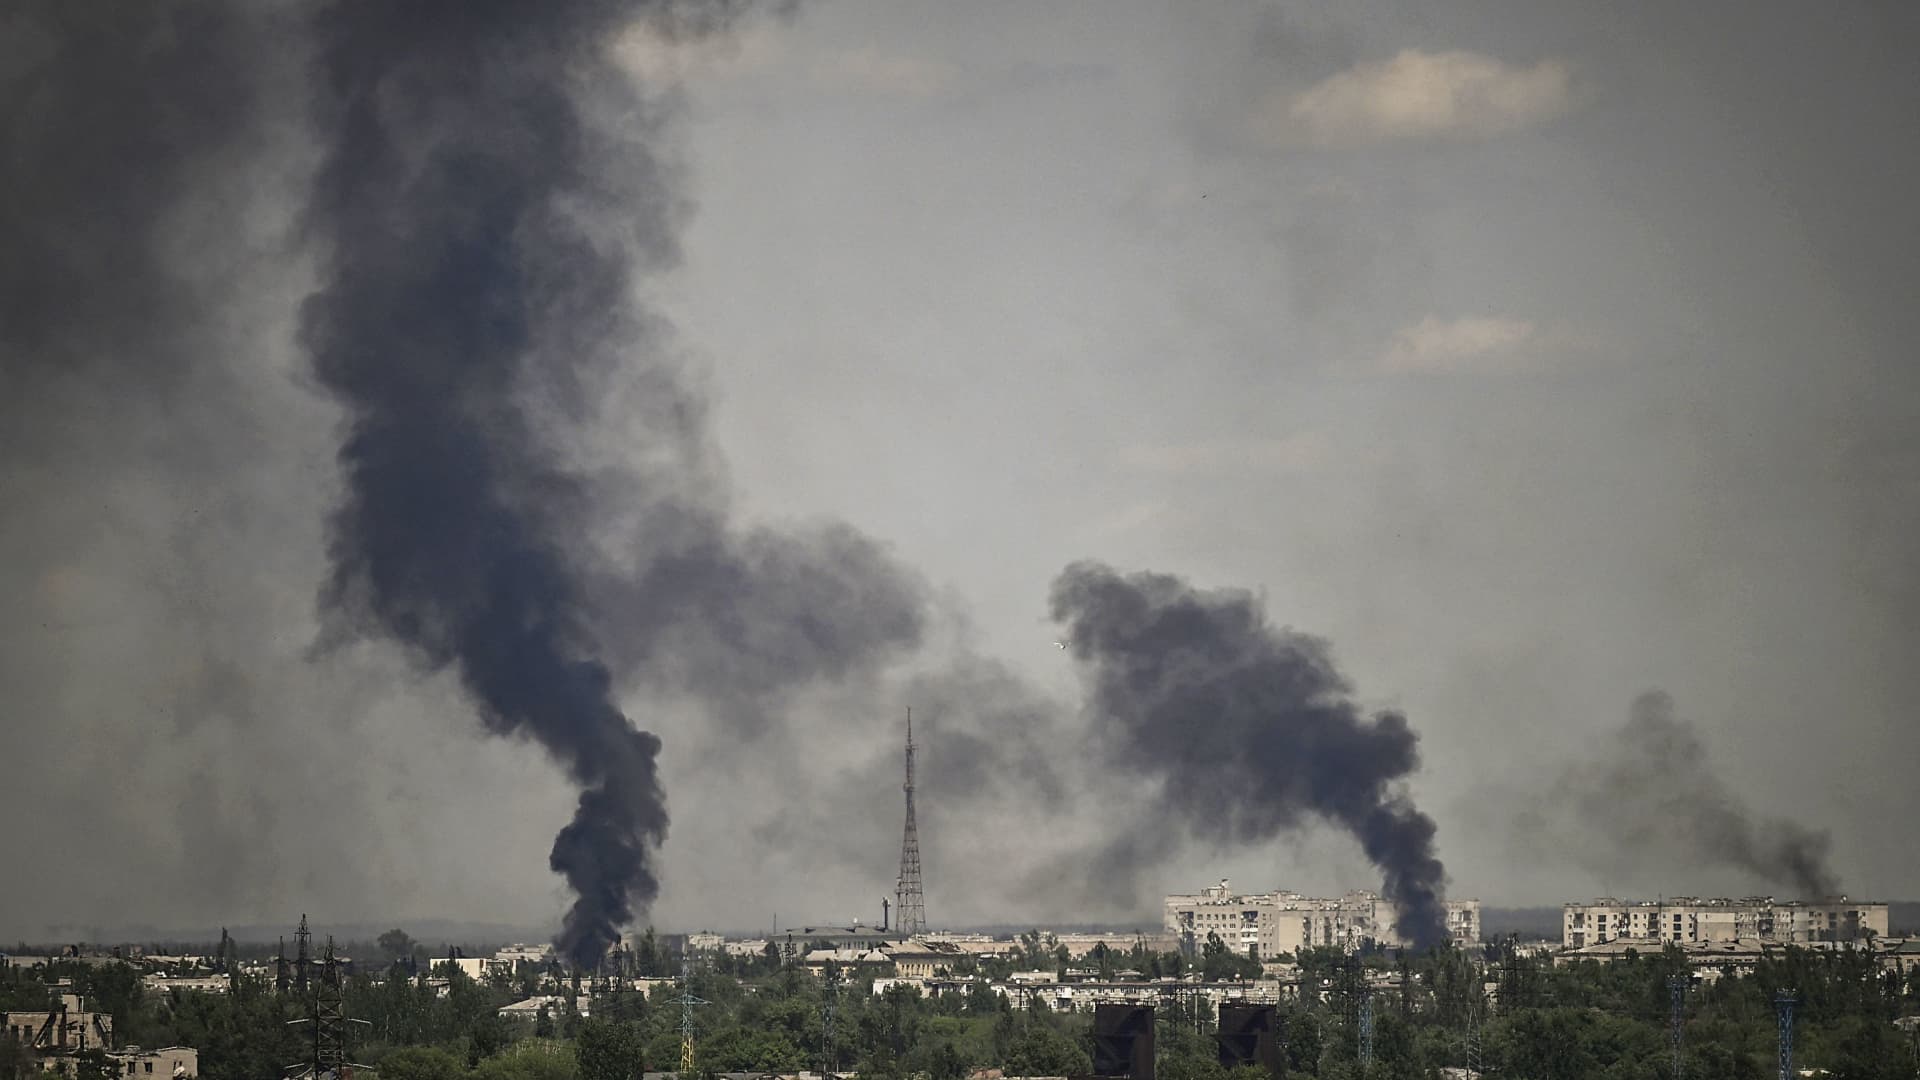 Smoke rises in the city of Sievierodonetsk during heavy fighting between Ukrainian and Russian troops on May 30, 2022.